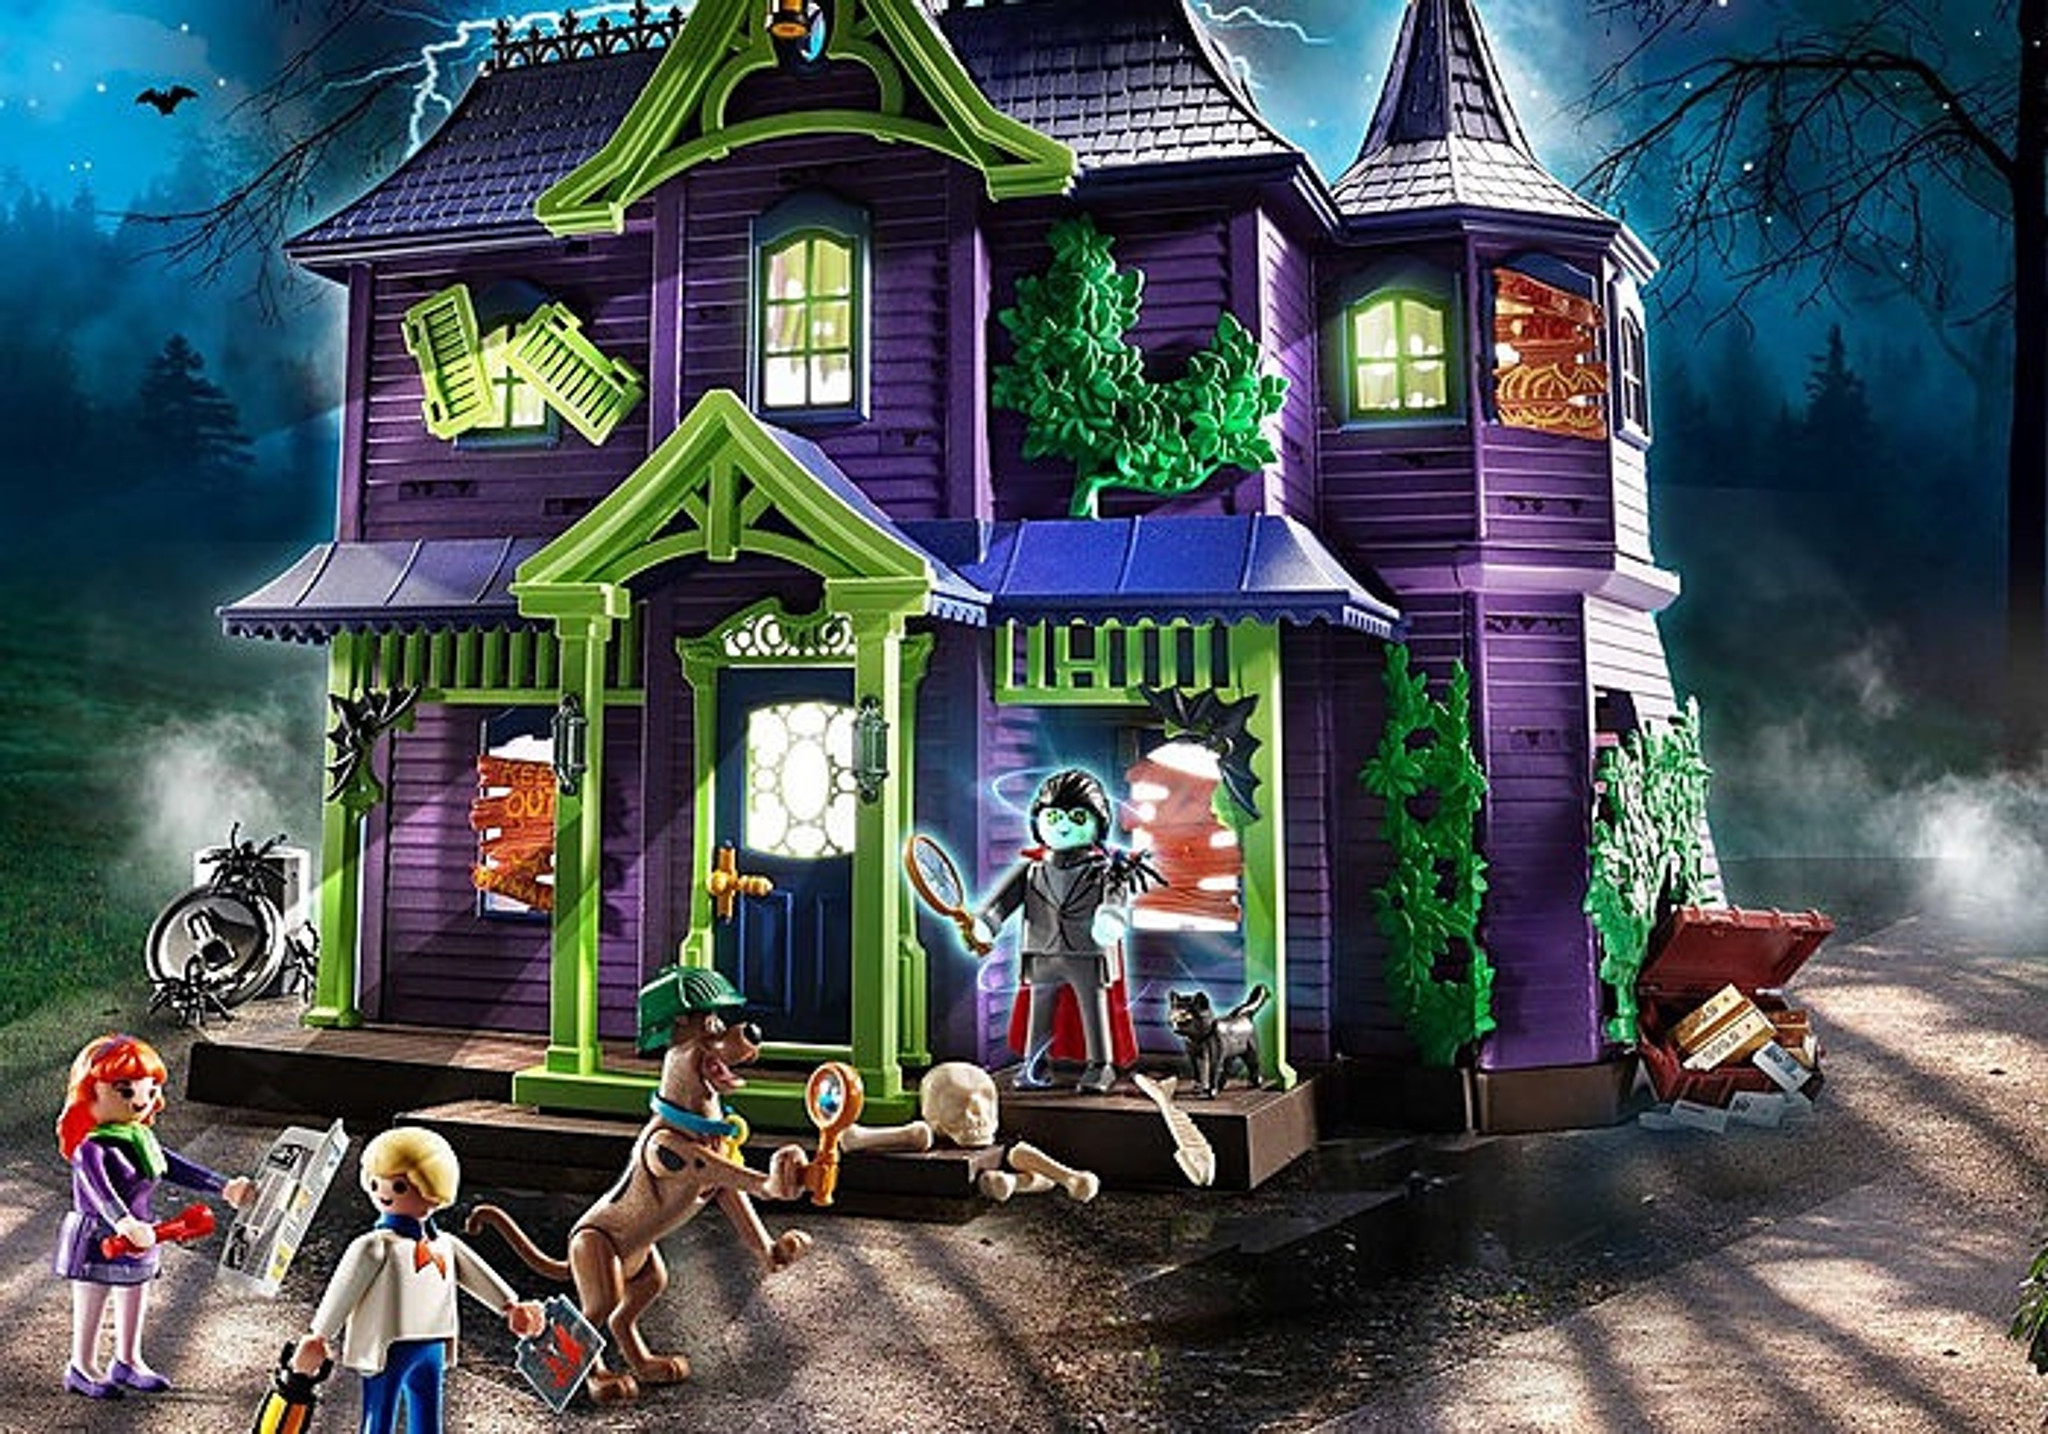 PLAYMOBIL SCOOBY-DOO! Adventure in the Mystery Mansion Playset 